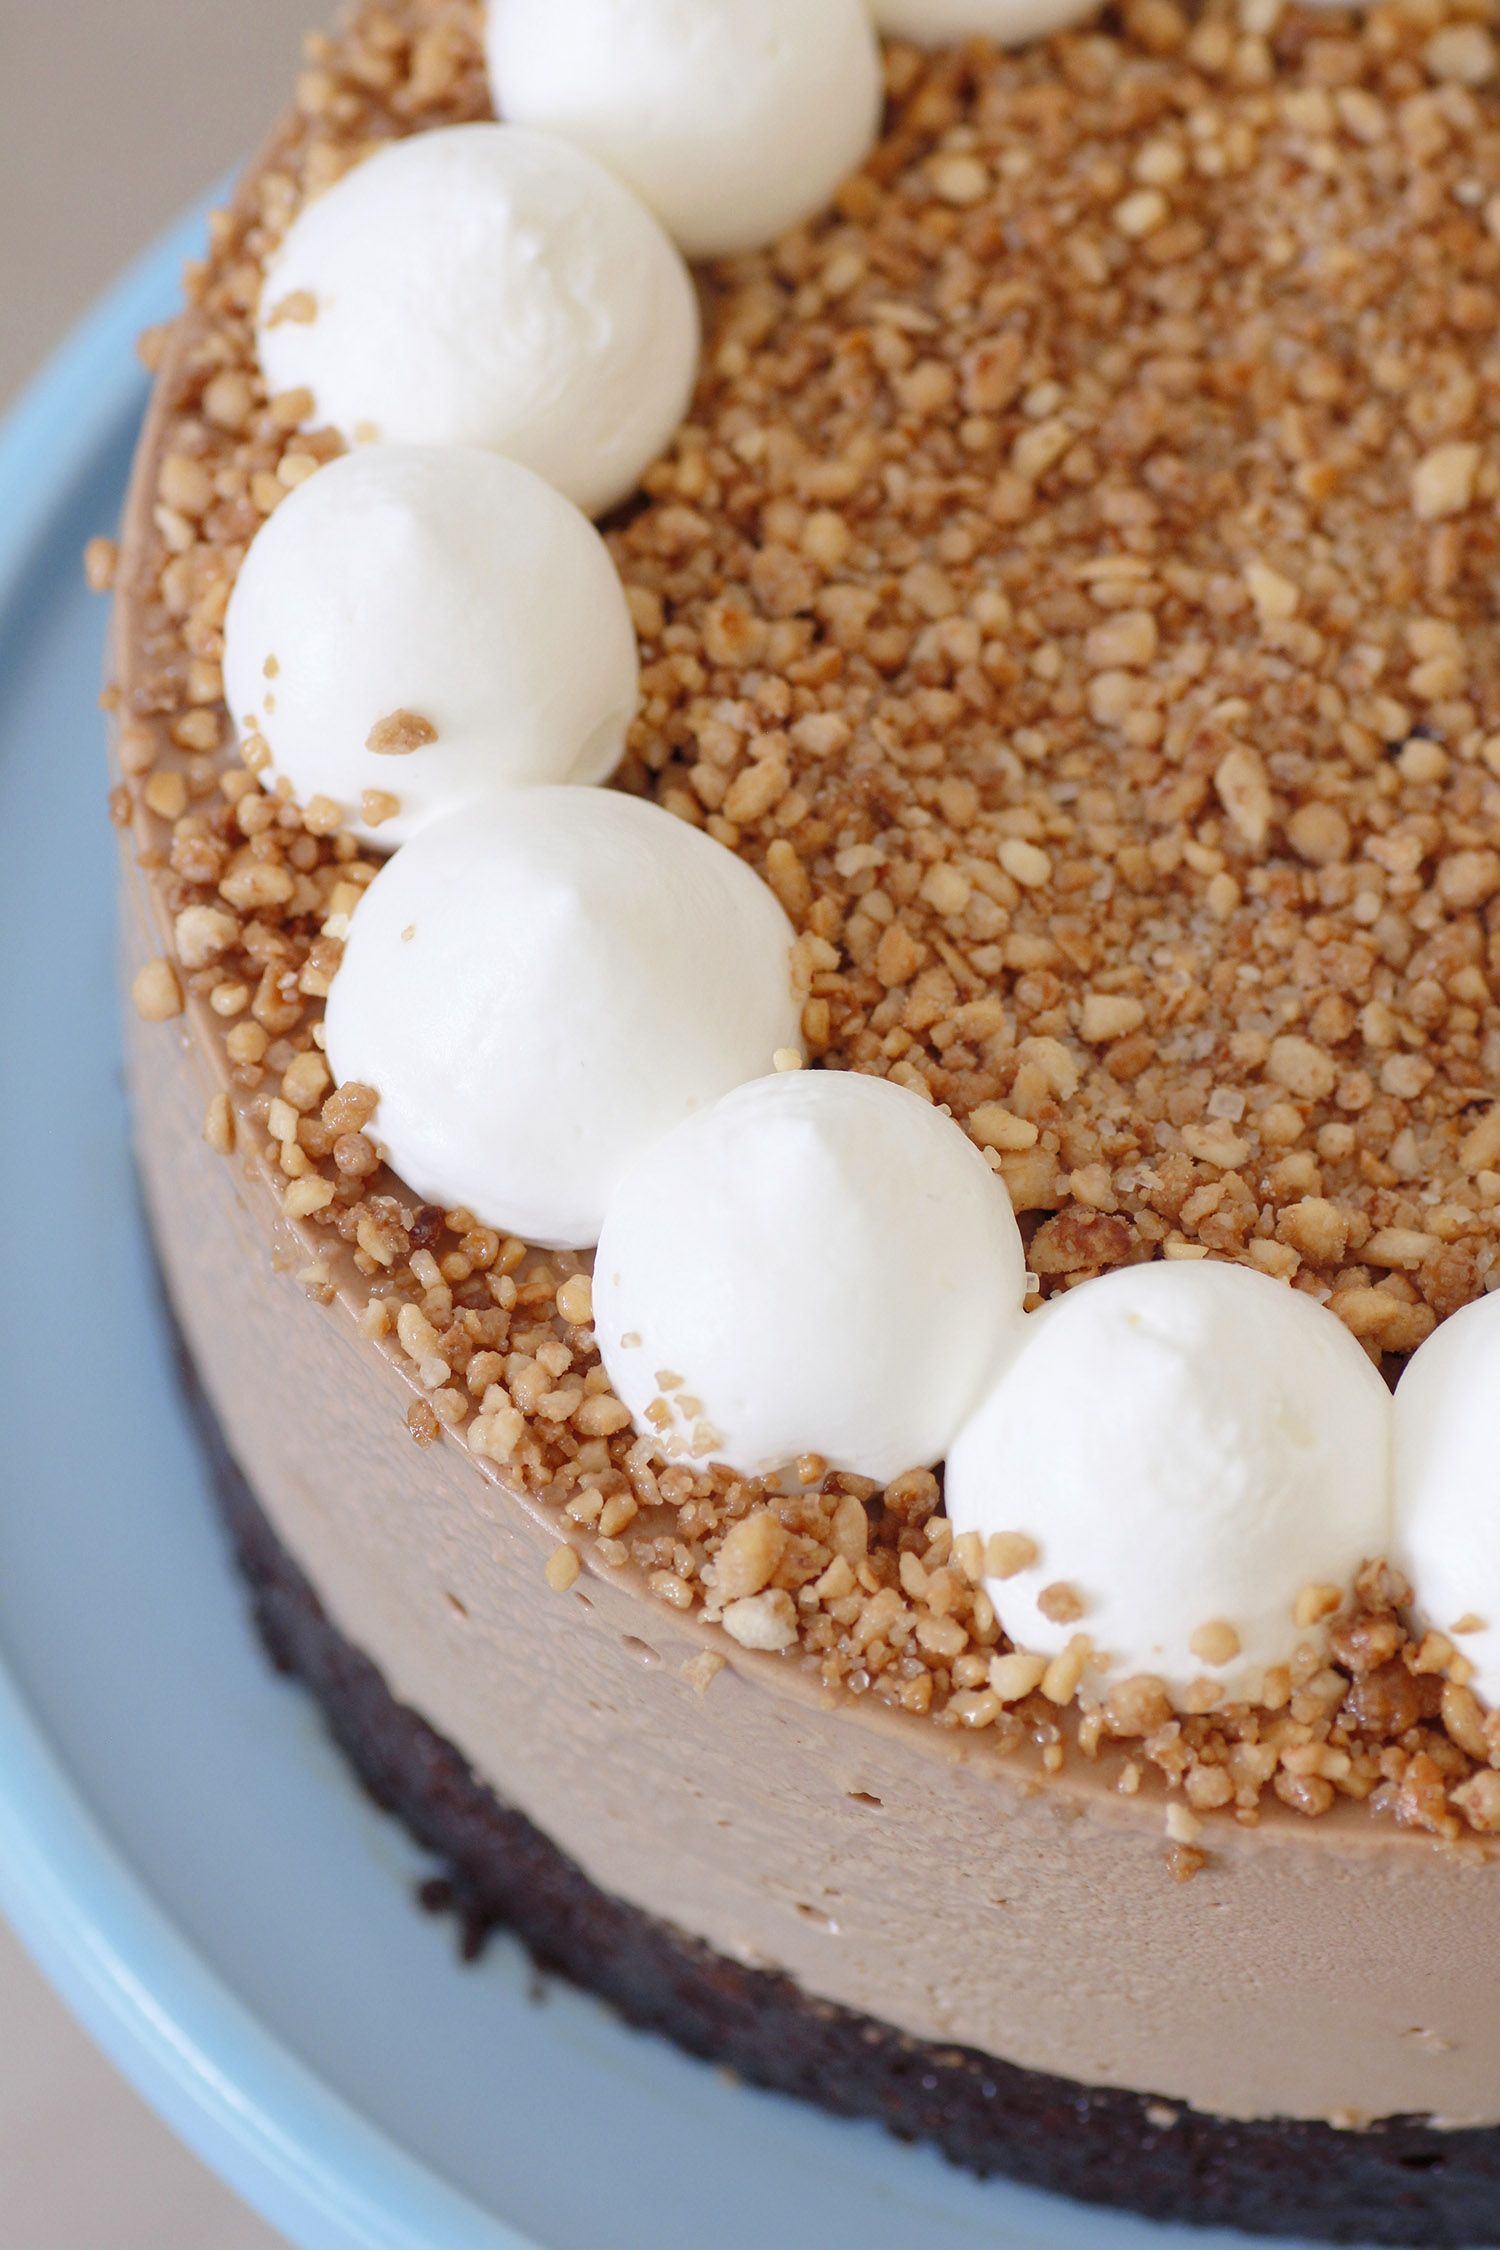 Coffee Mousse Cake with Chocolate and Hazelnuts